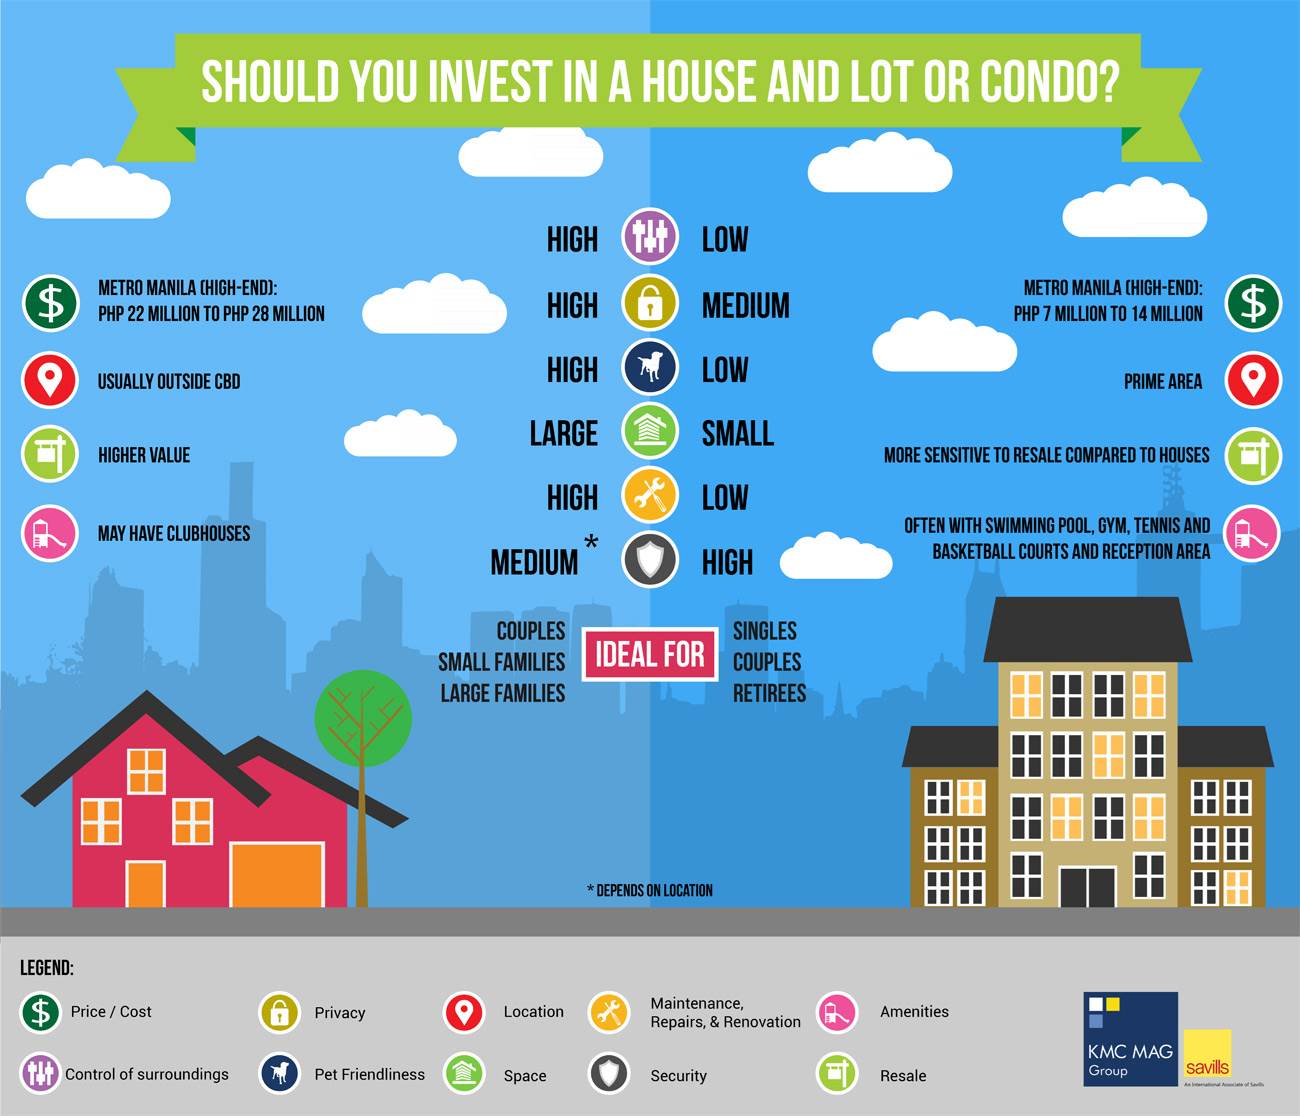 House vs. Condo: Which is a better investment? (Infographic)